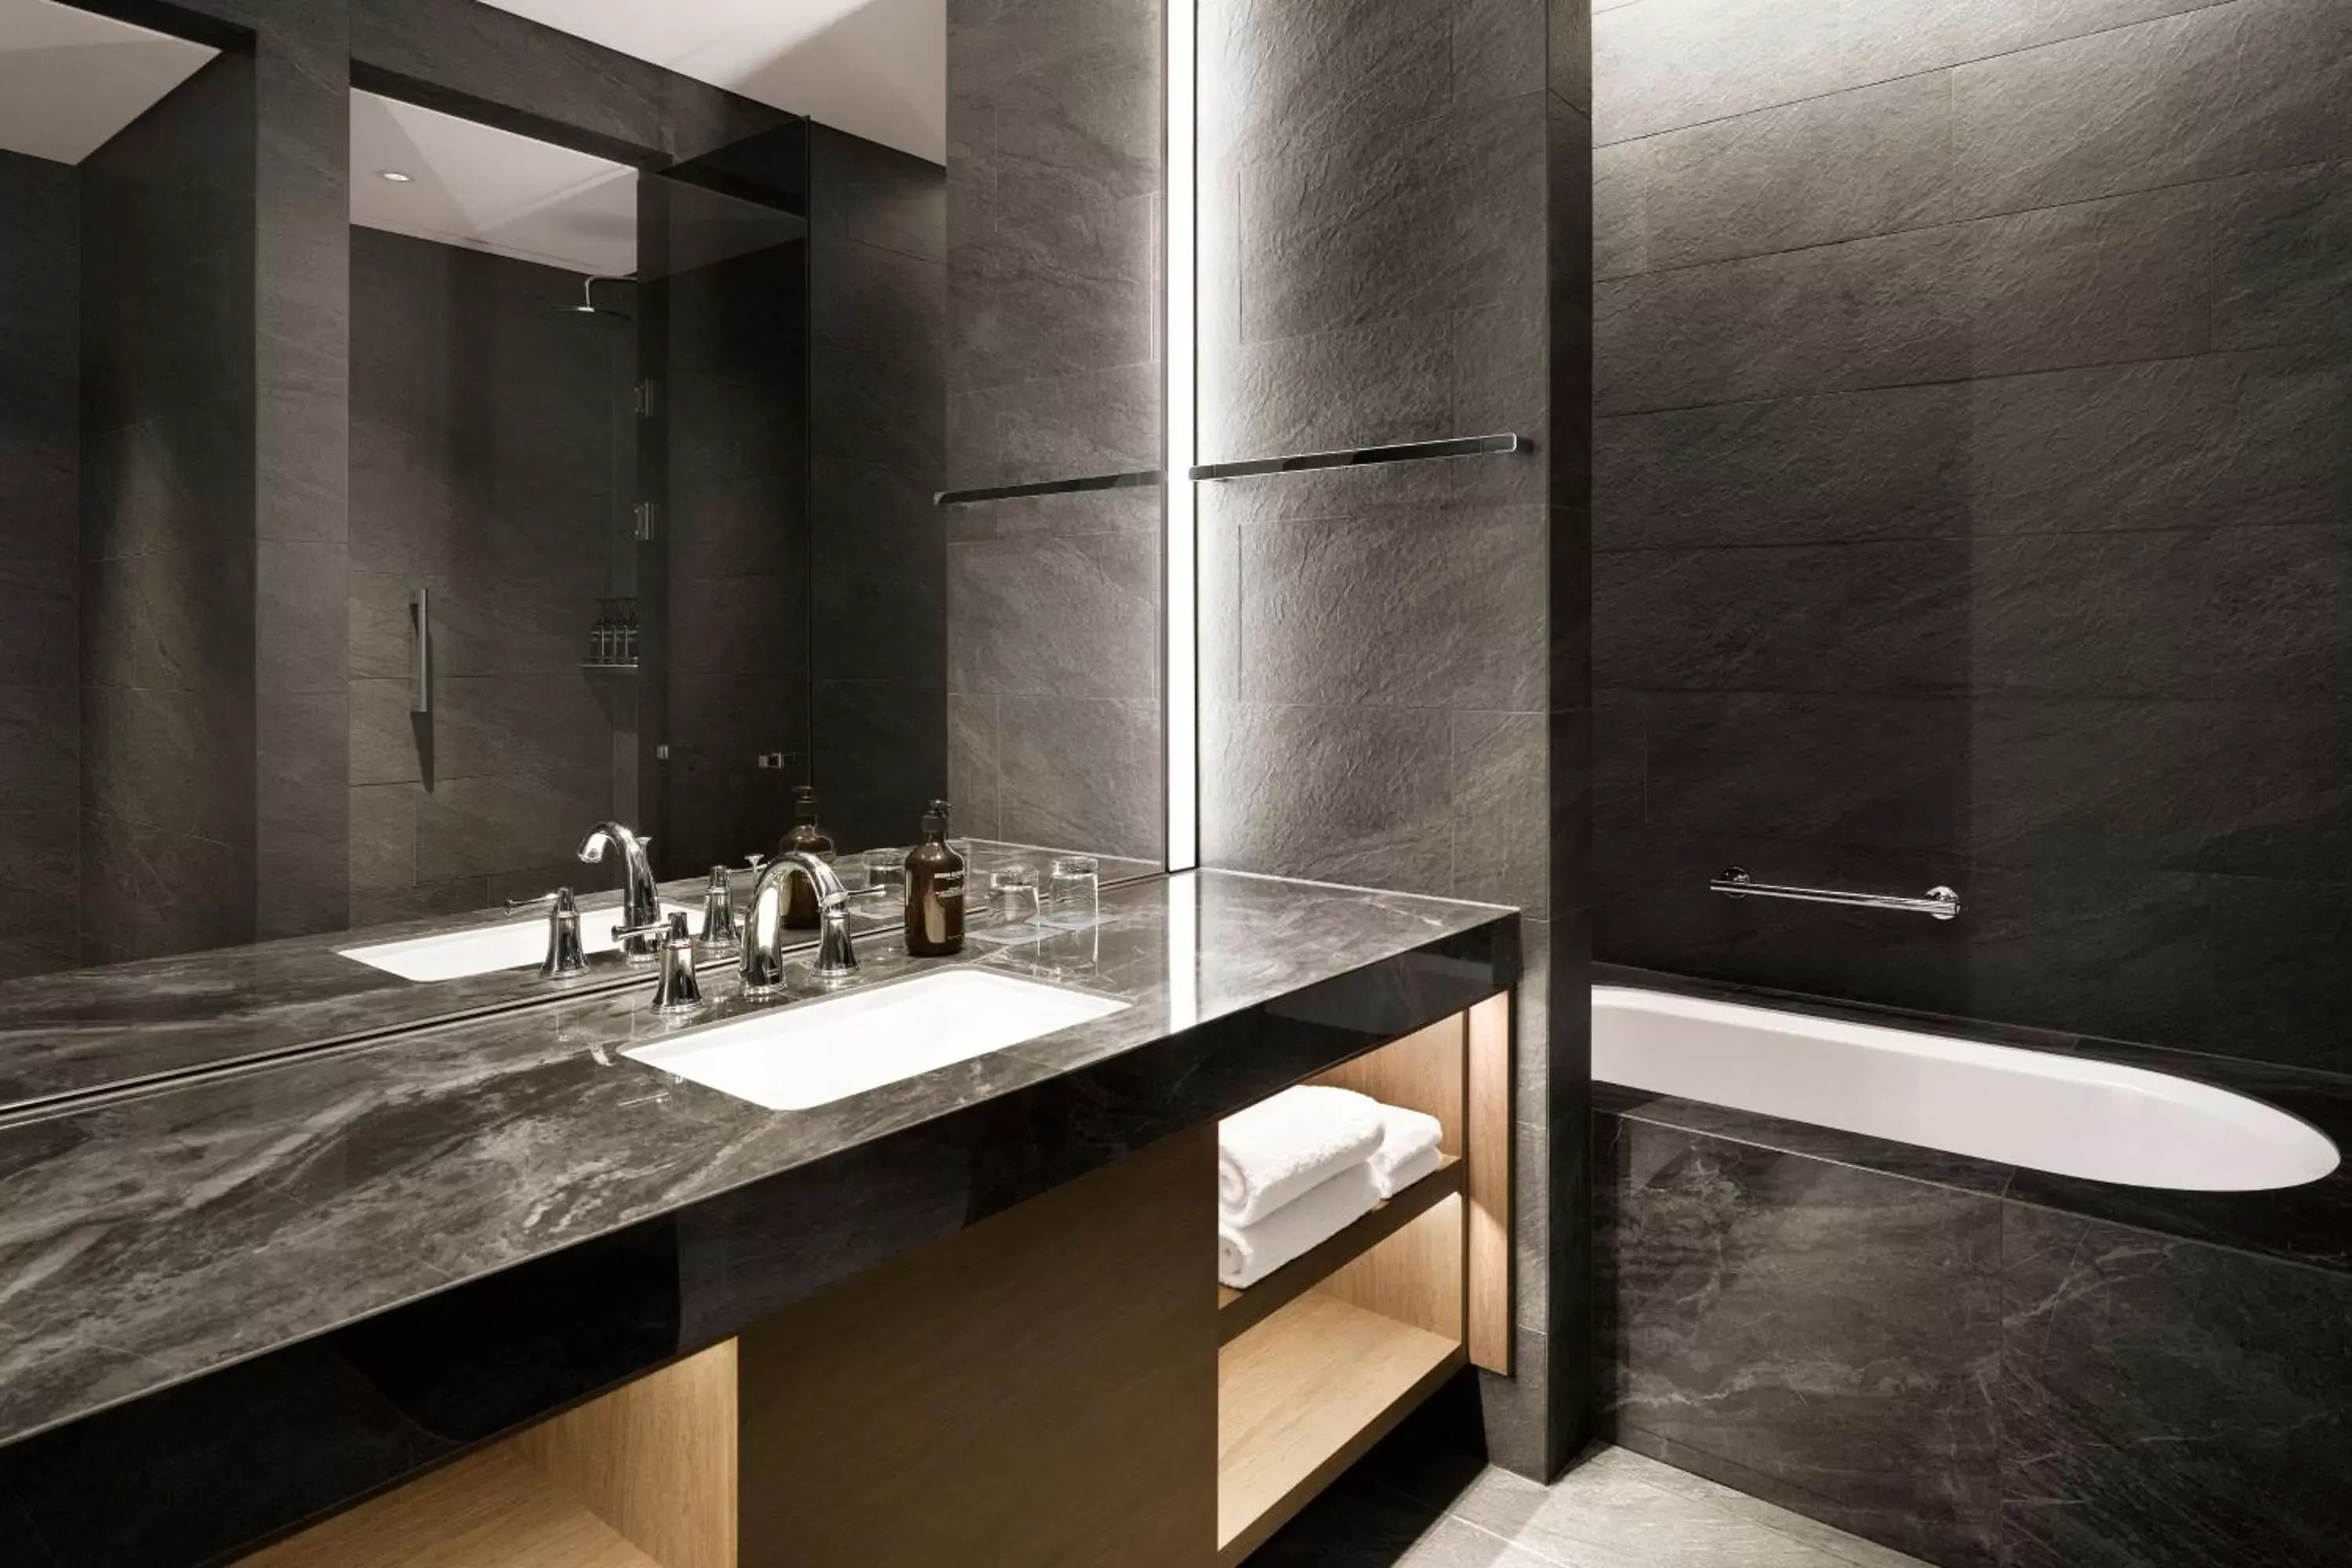 Bathroom in Hotel Onoma, Daejeon, Autograph Collection